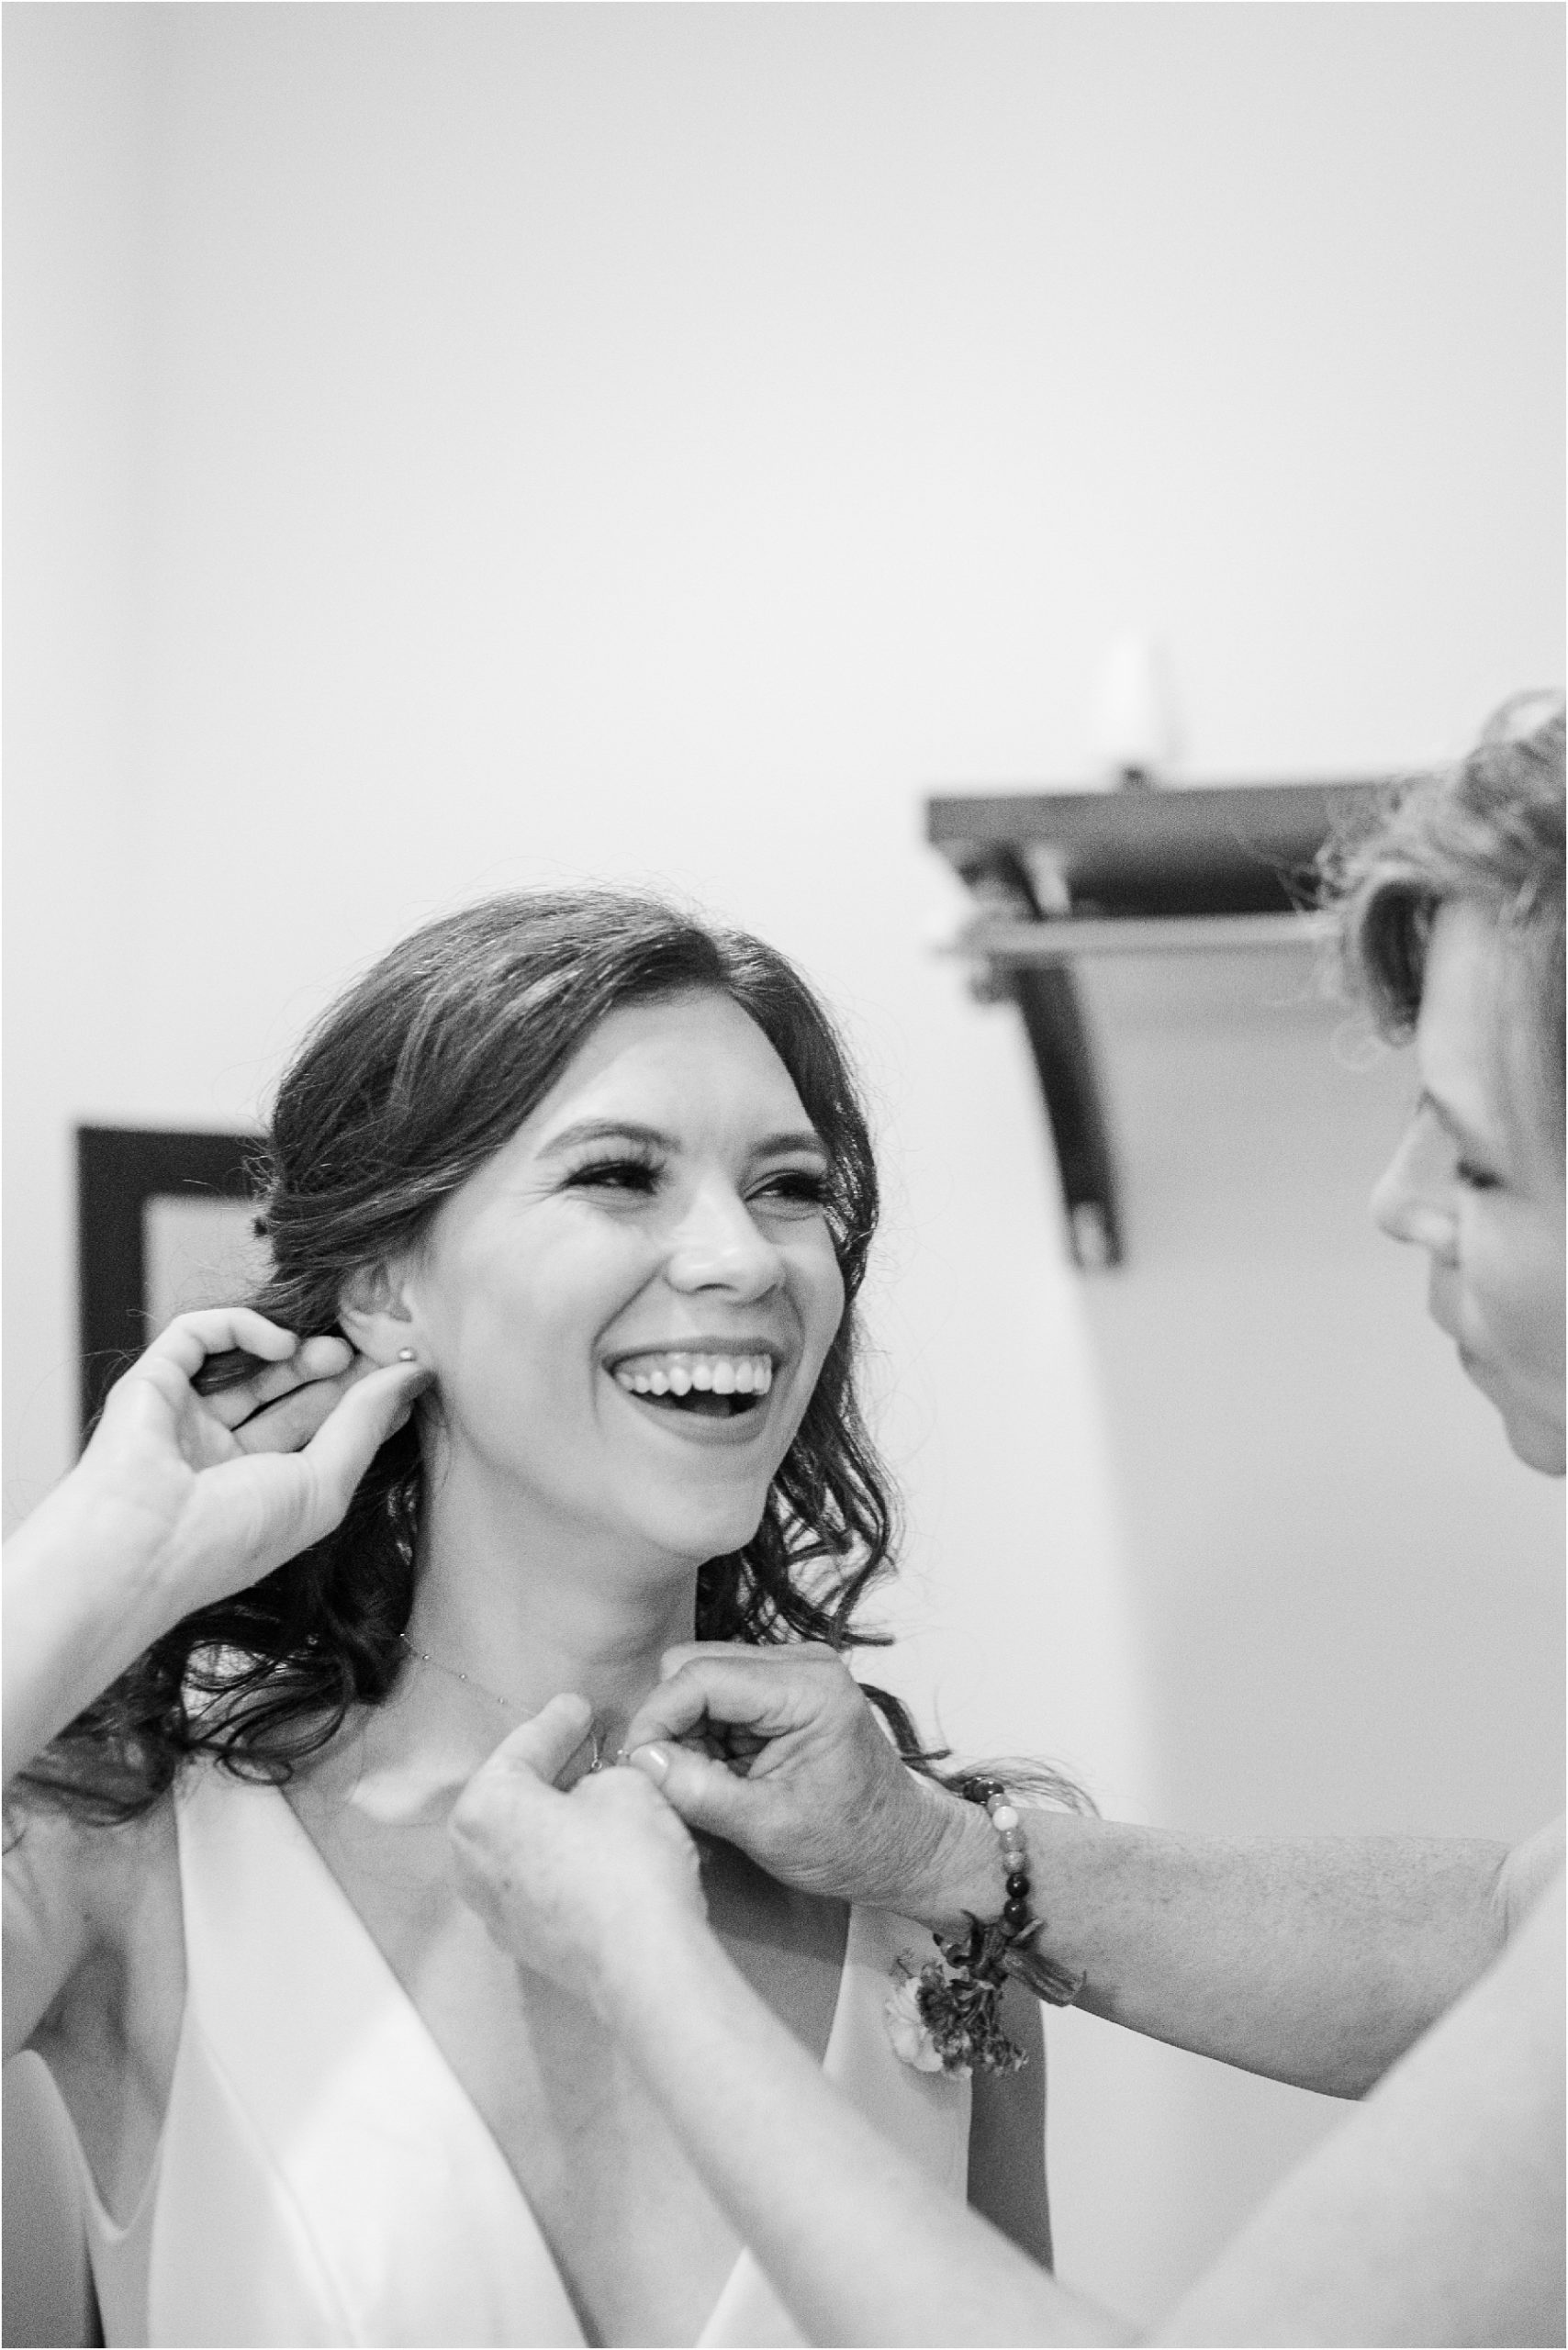 Woman laughing as she puts on earrings for her wedding